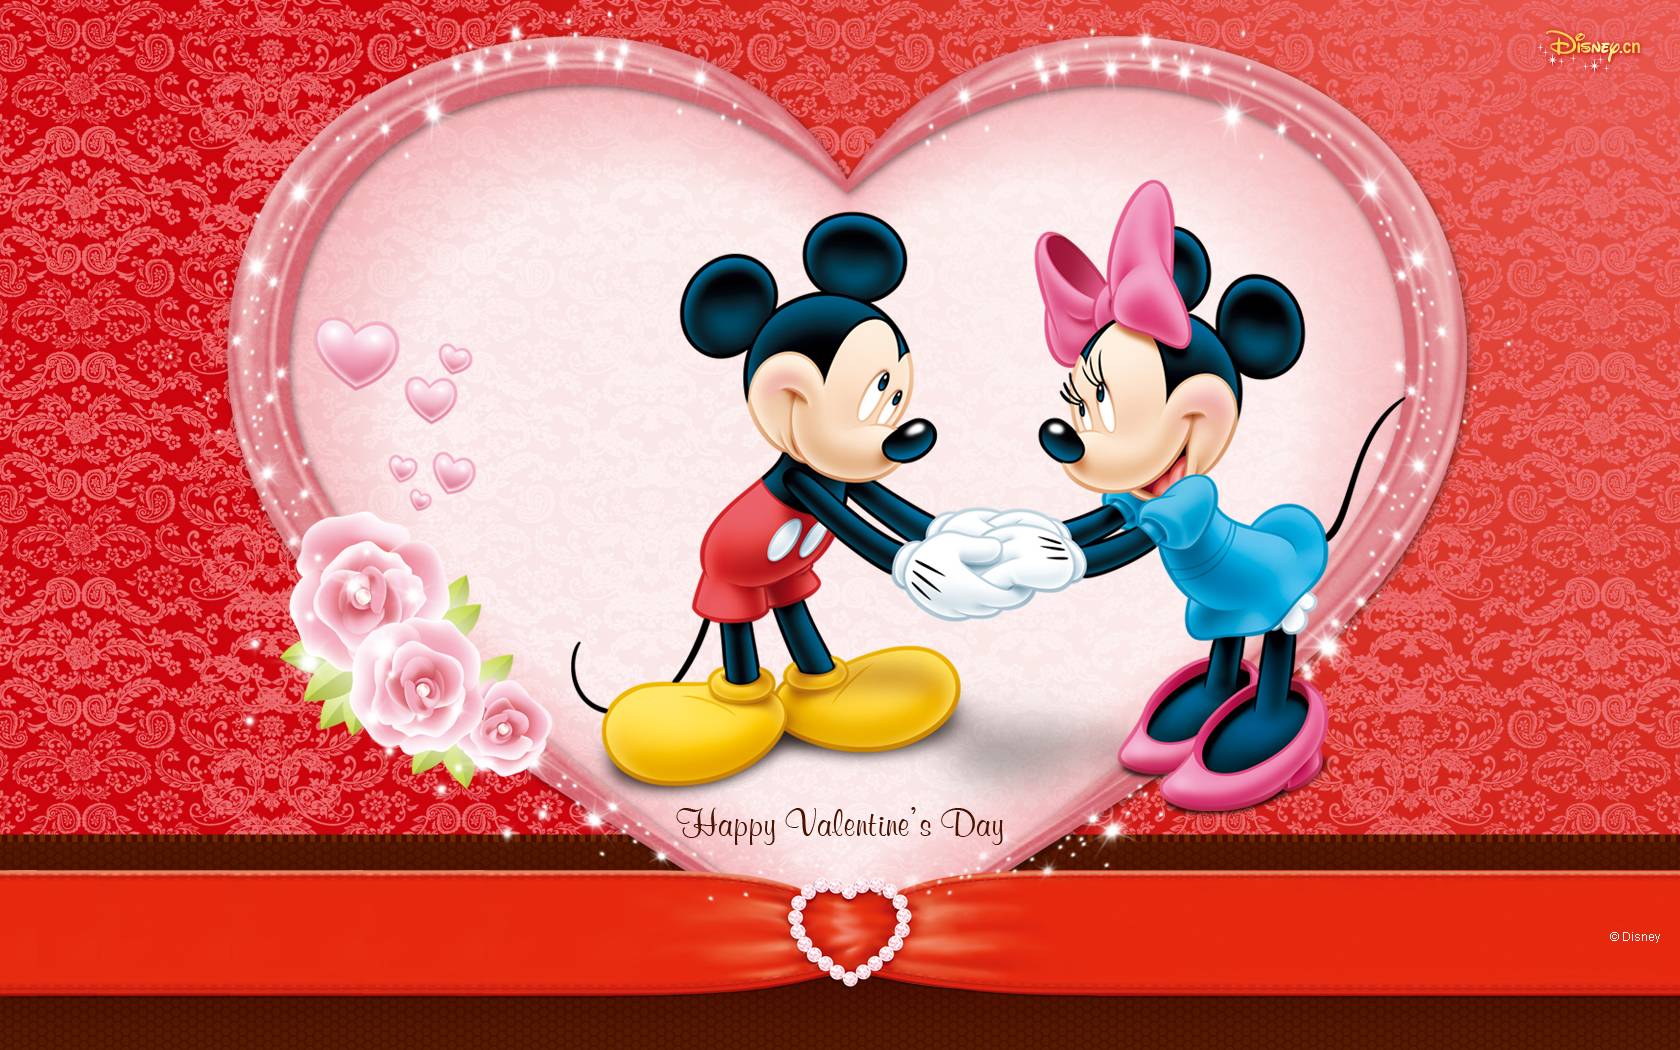 Mickey And Minnie Valentine&;s Day Wallpaper photo of romantic